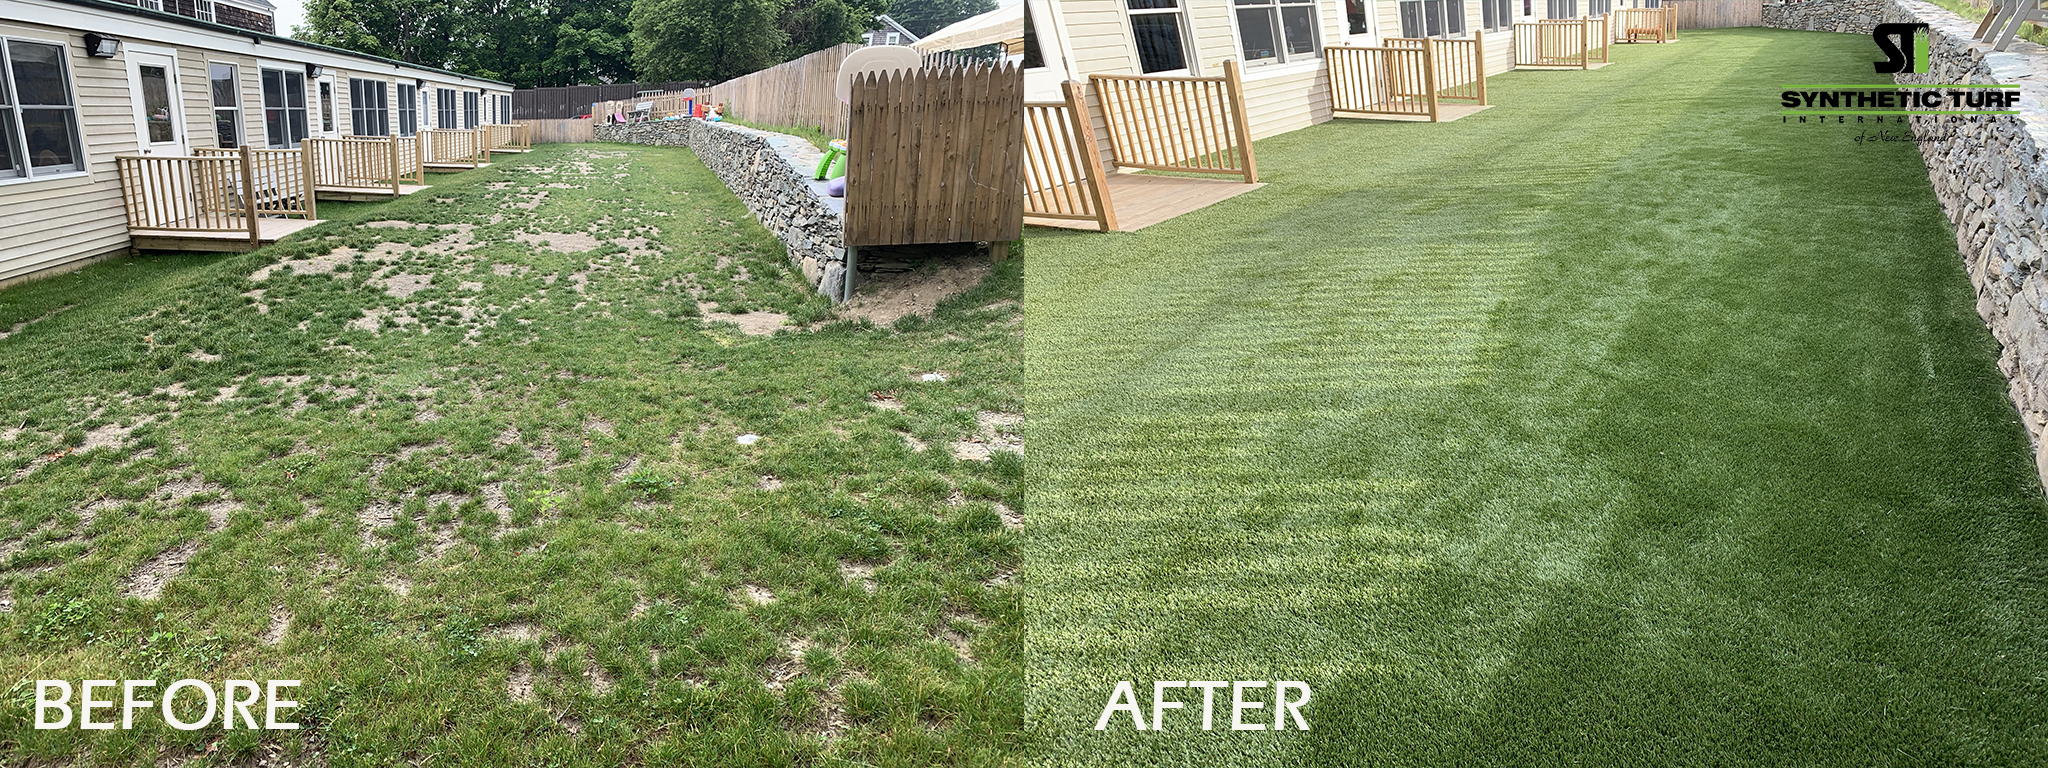 Before and after photos side by side -transformation of a backyard in Massachusetts, showing the dramatic improvement from St.Germain's high-quality artificial grass installation.